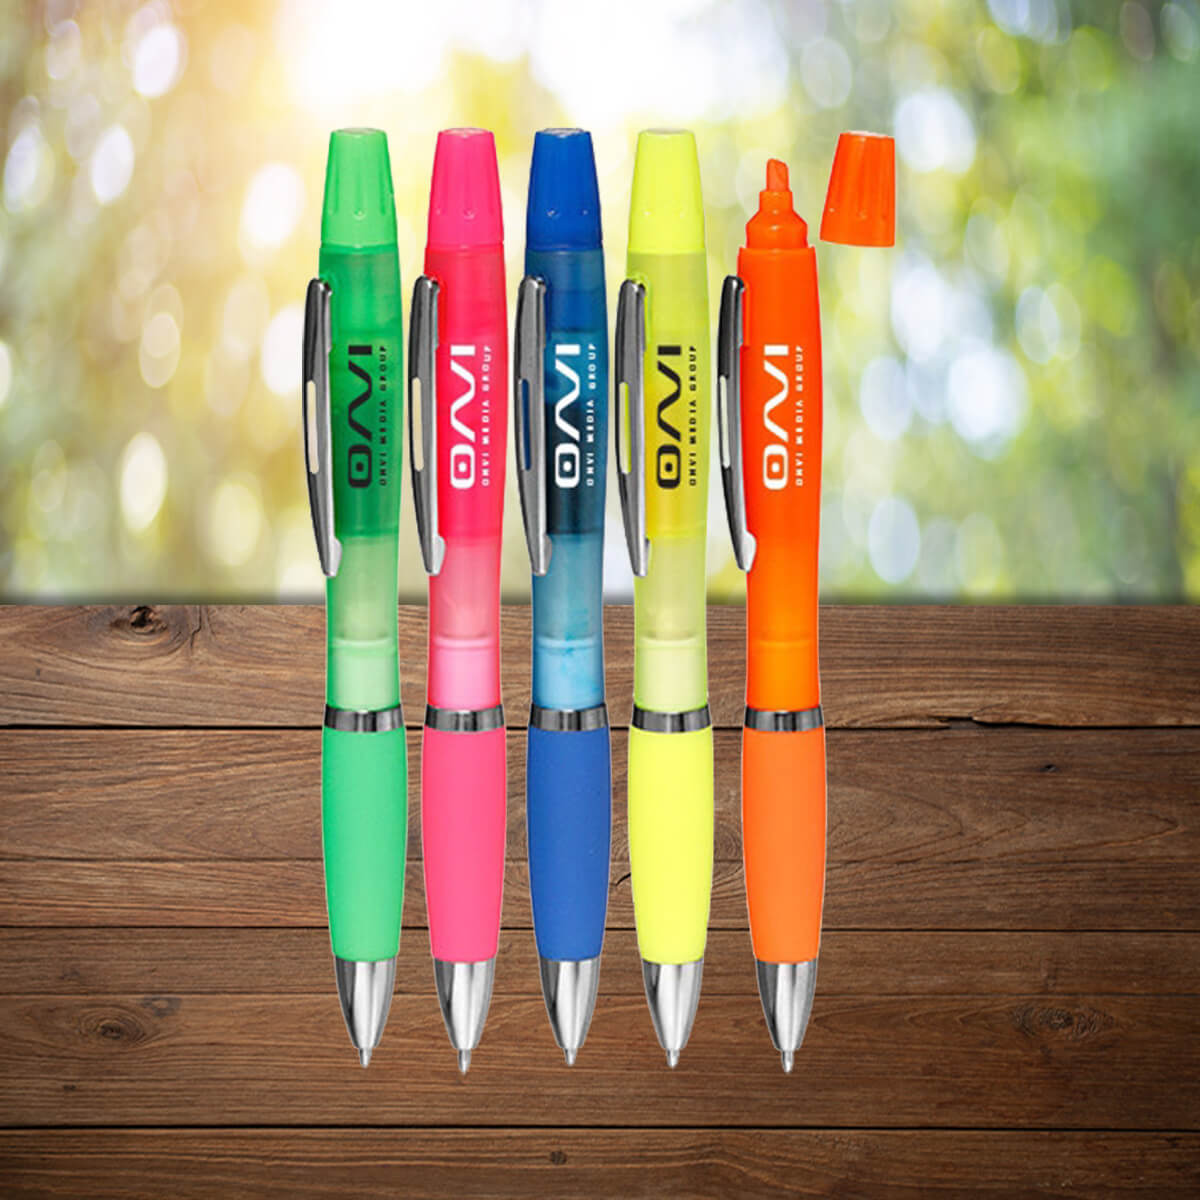 Capped dual highlighter pen and colors with branding promotional writing implements by curative printing